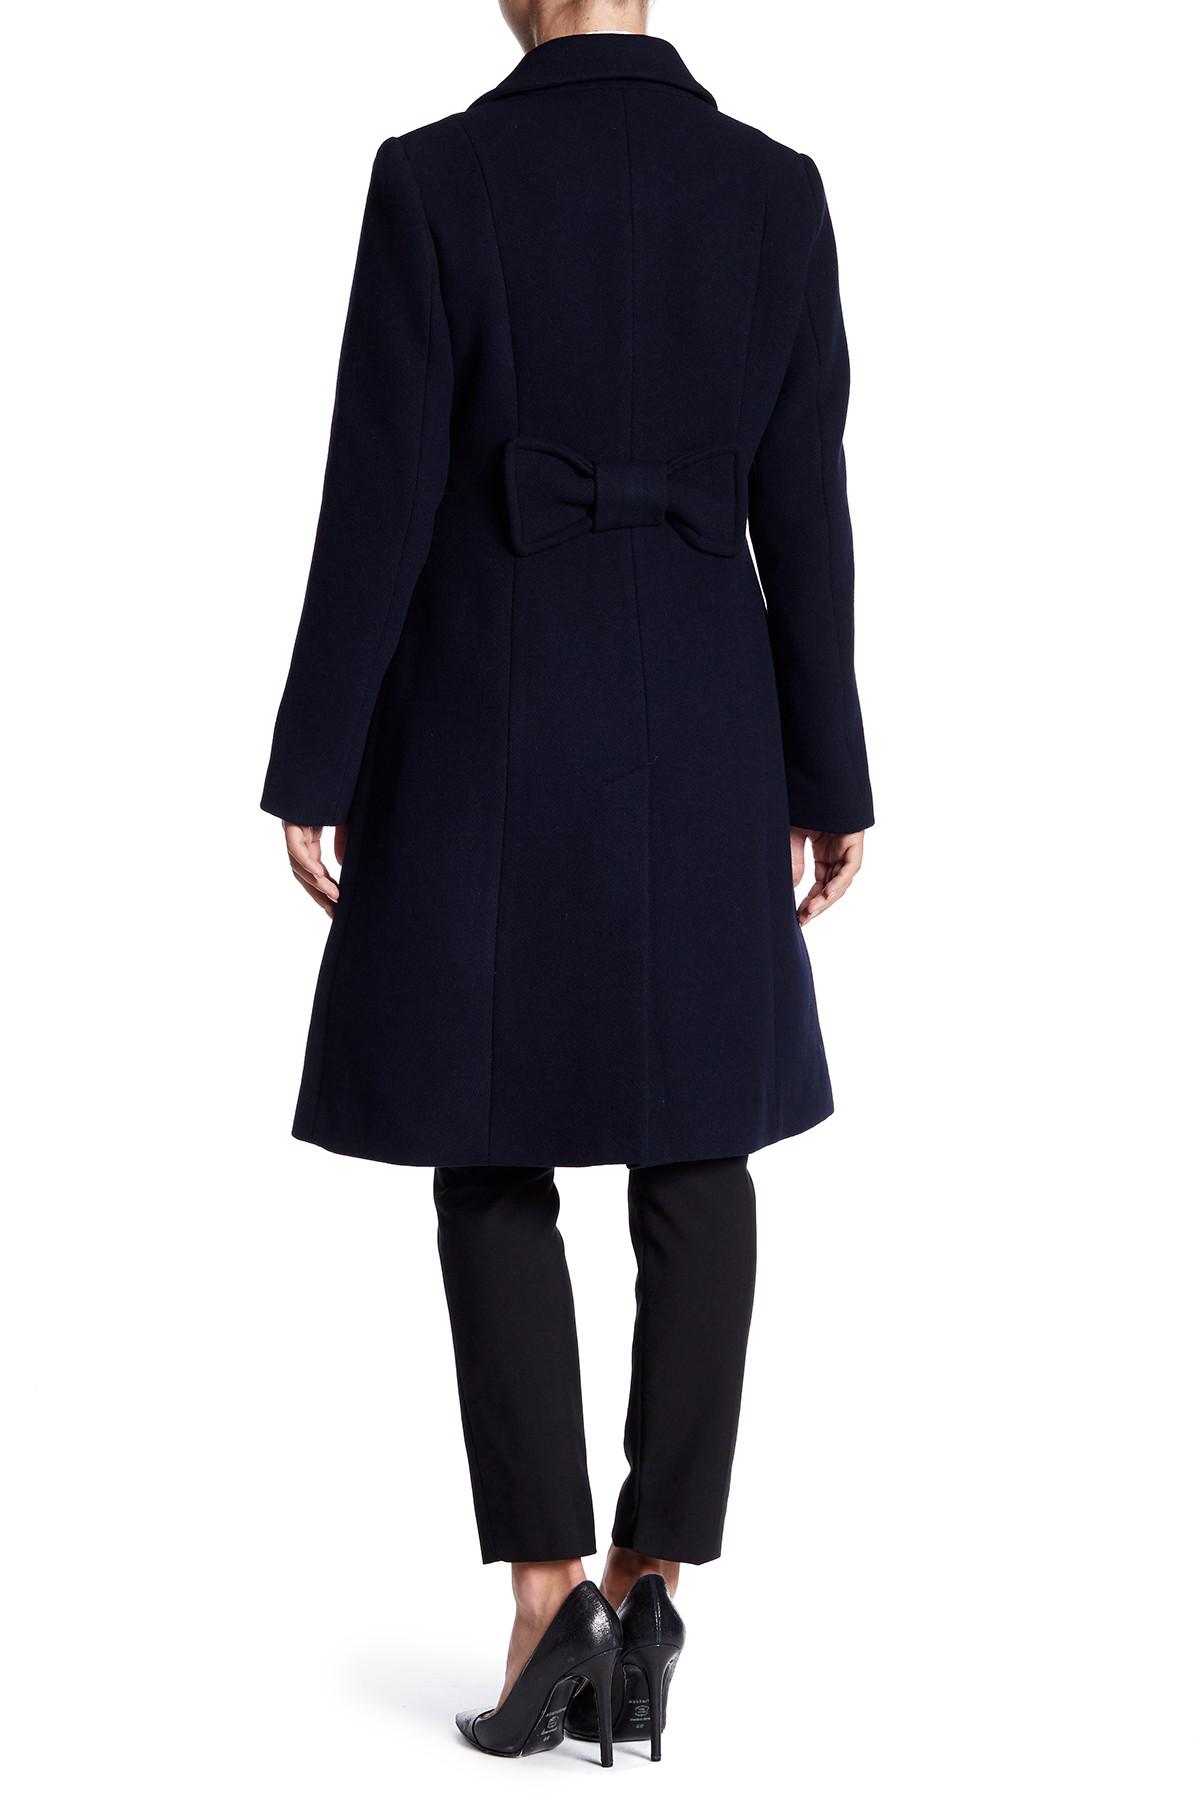 Kate Spade Faux Fur Collar Back Bow Coat in Blue - Lyst